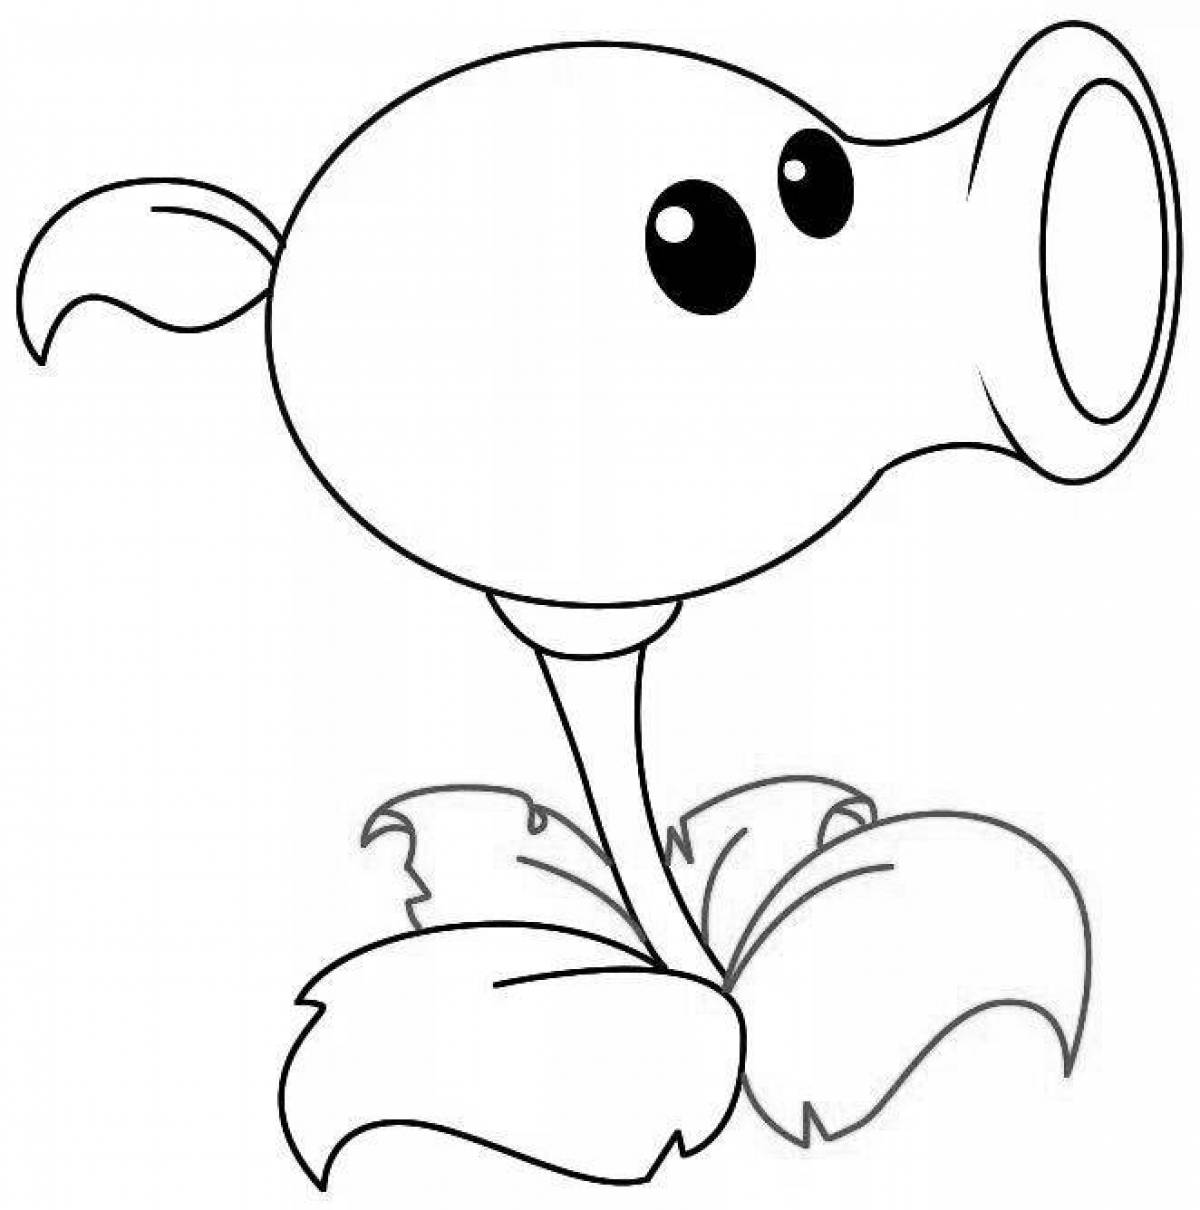 Coloring page cute pea shooter